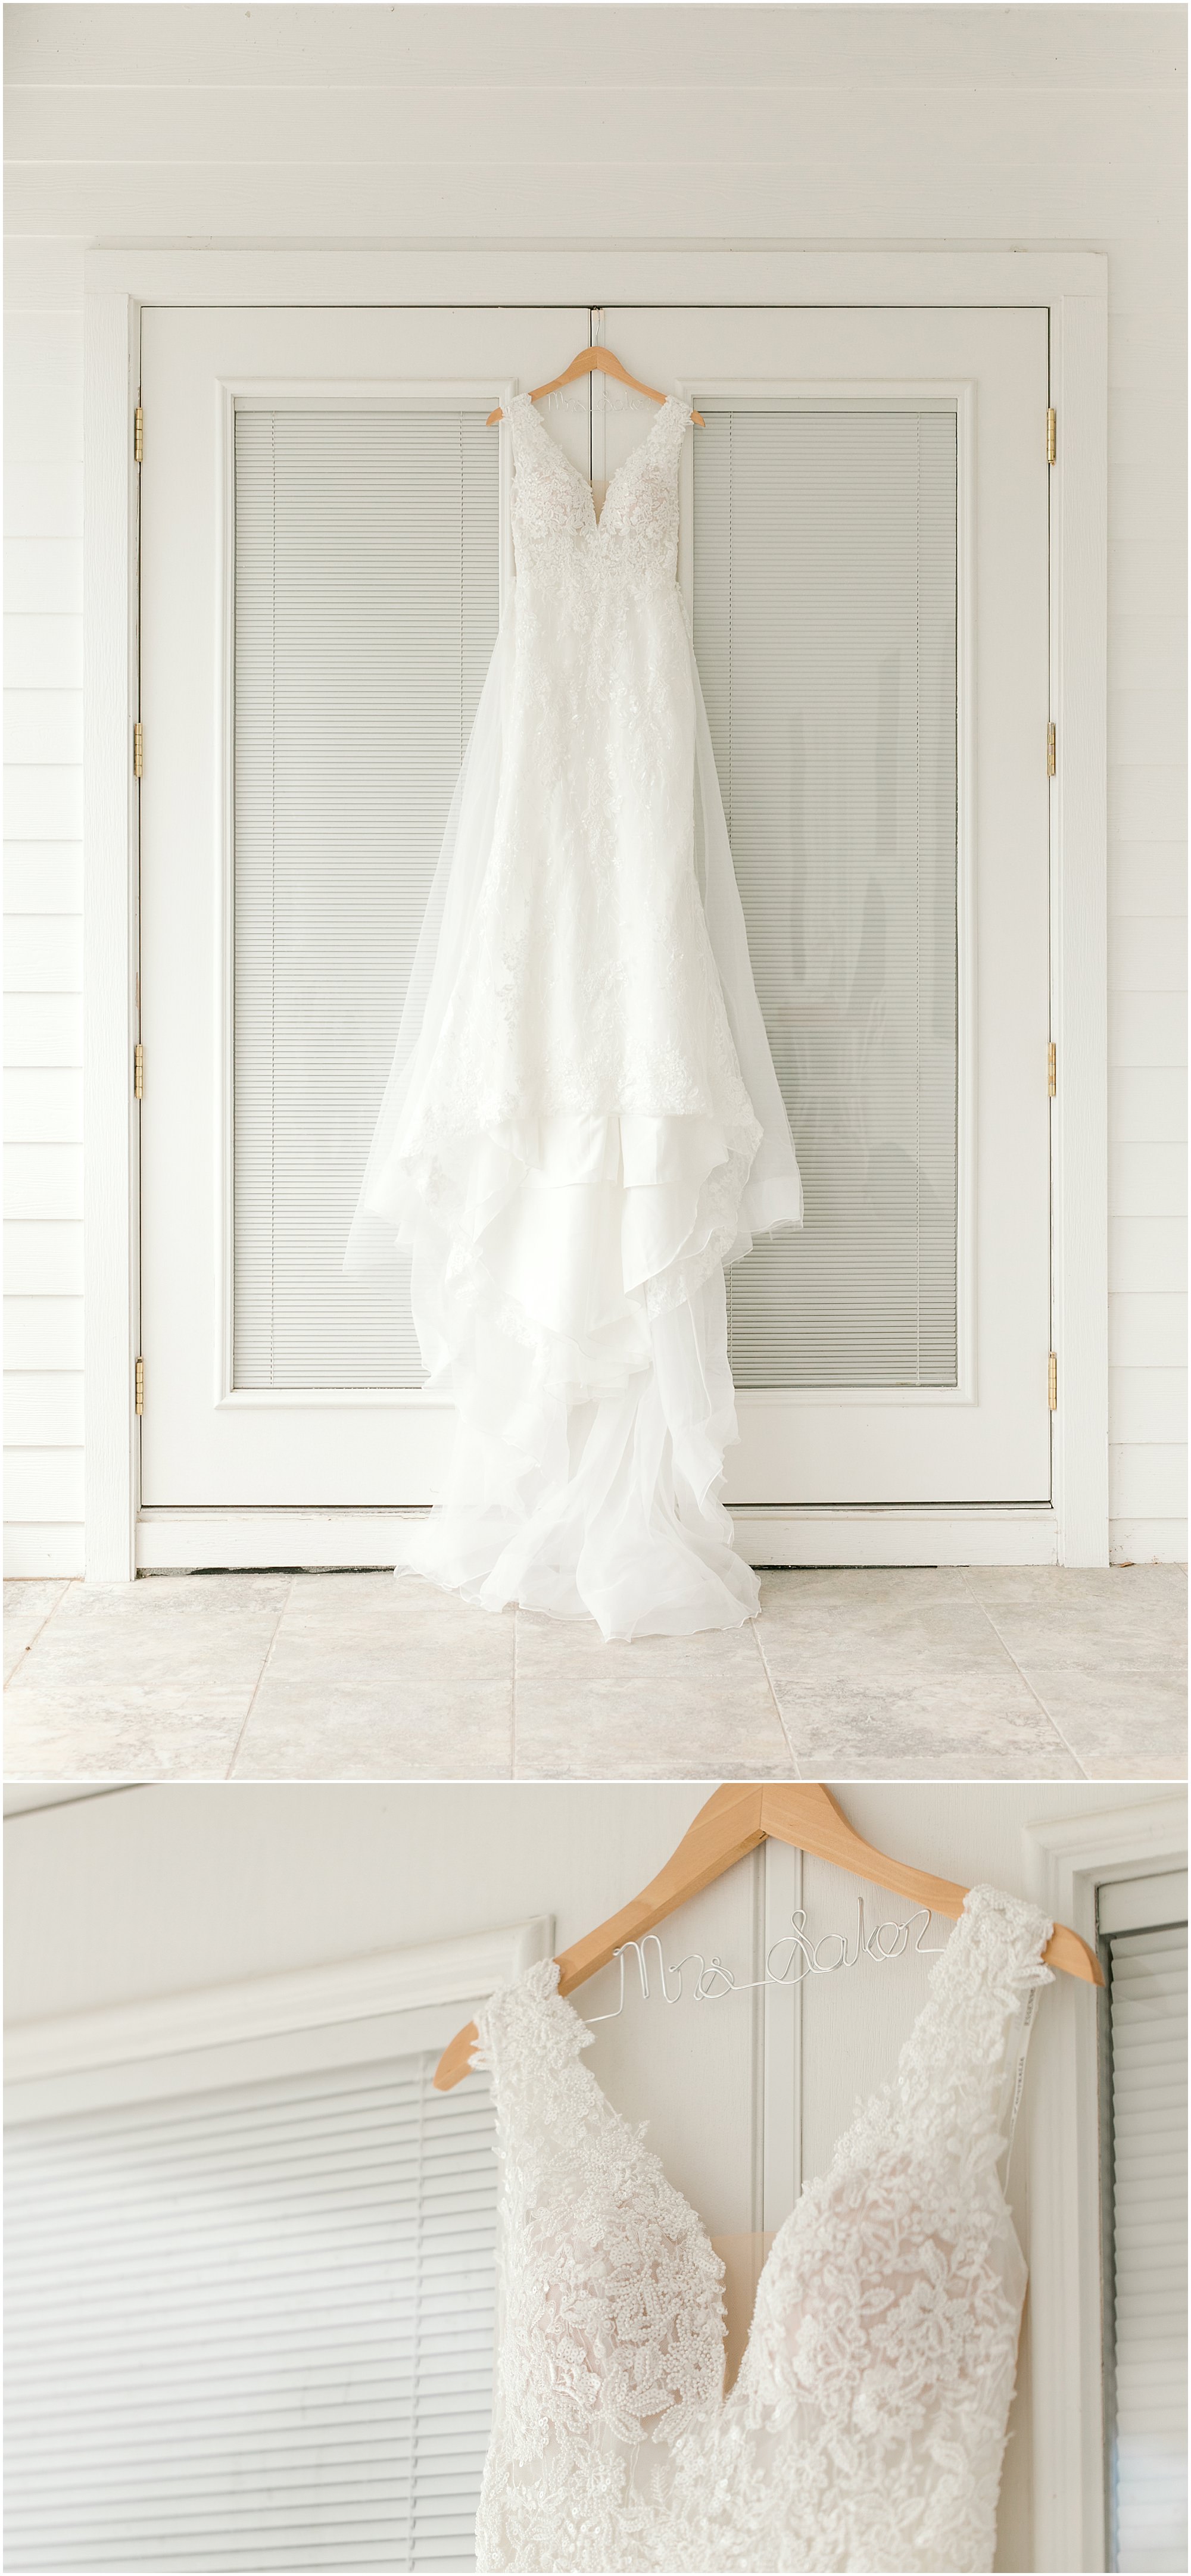 Essence of Australia wedding dress hanging from a patio door at Arundel Estate at Dreamy wedding